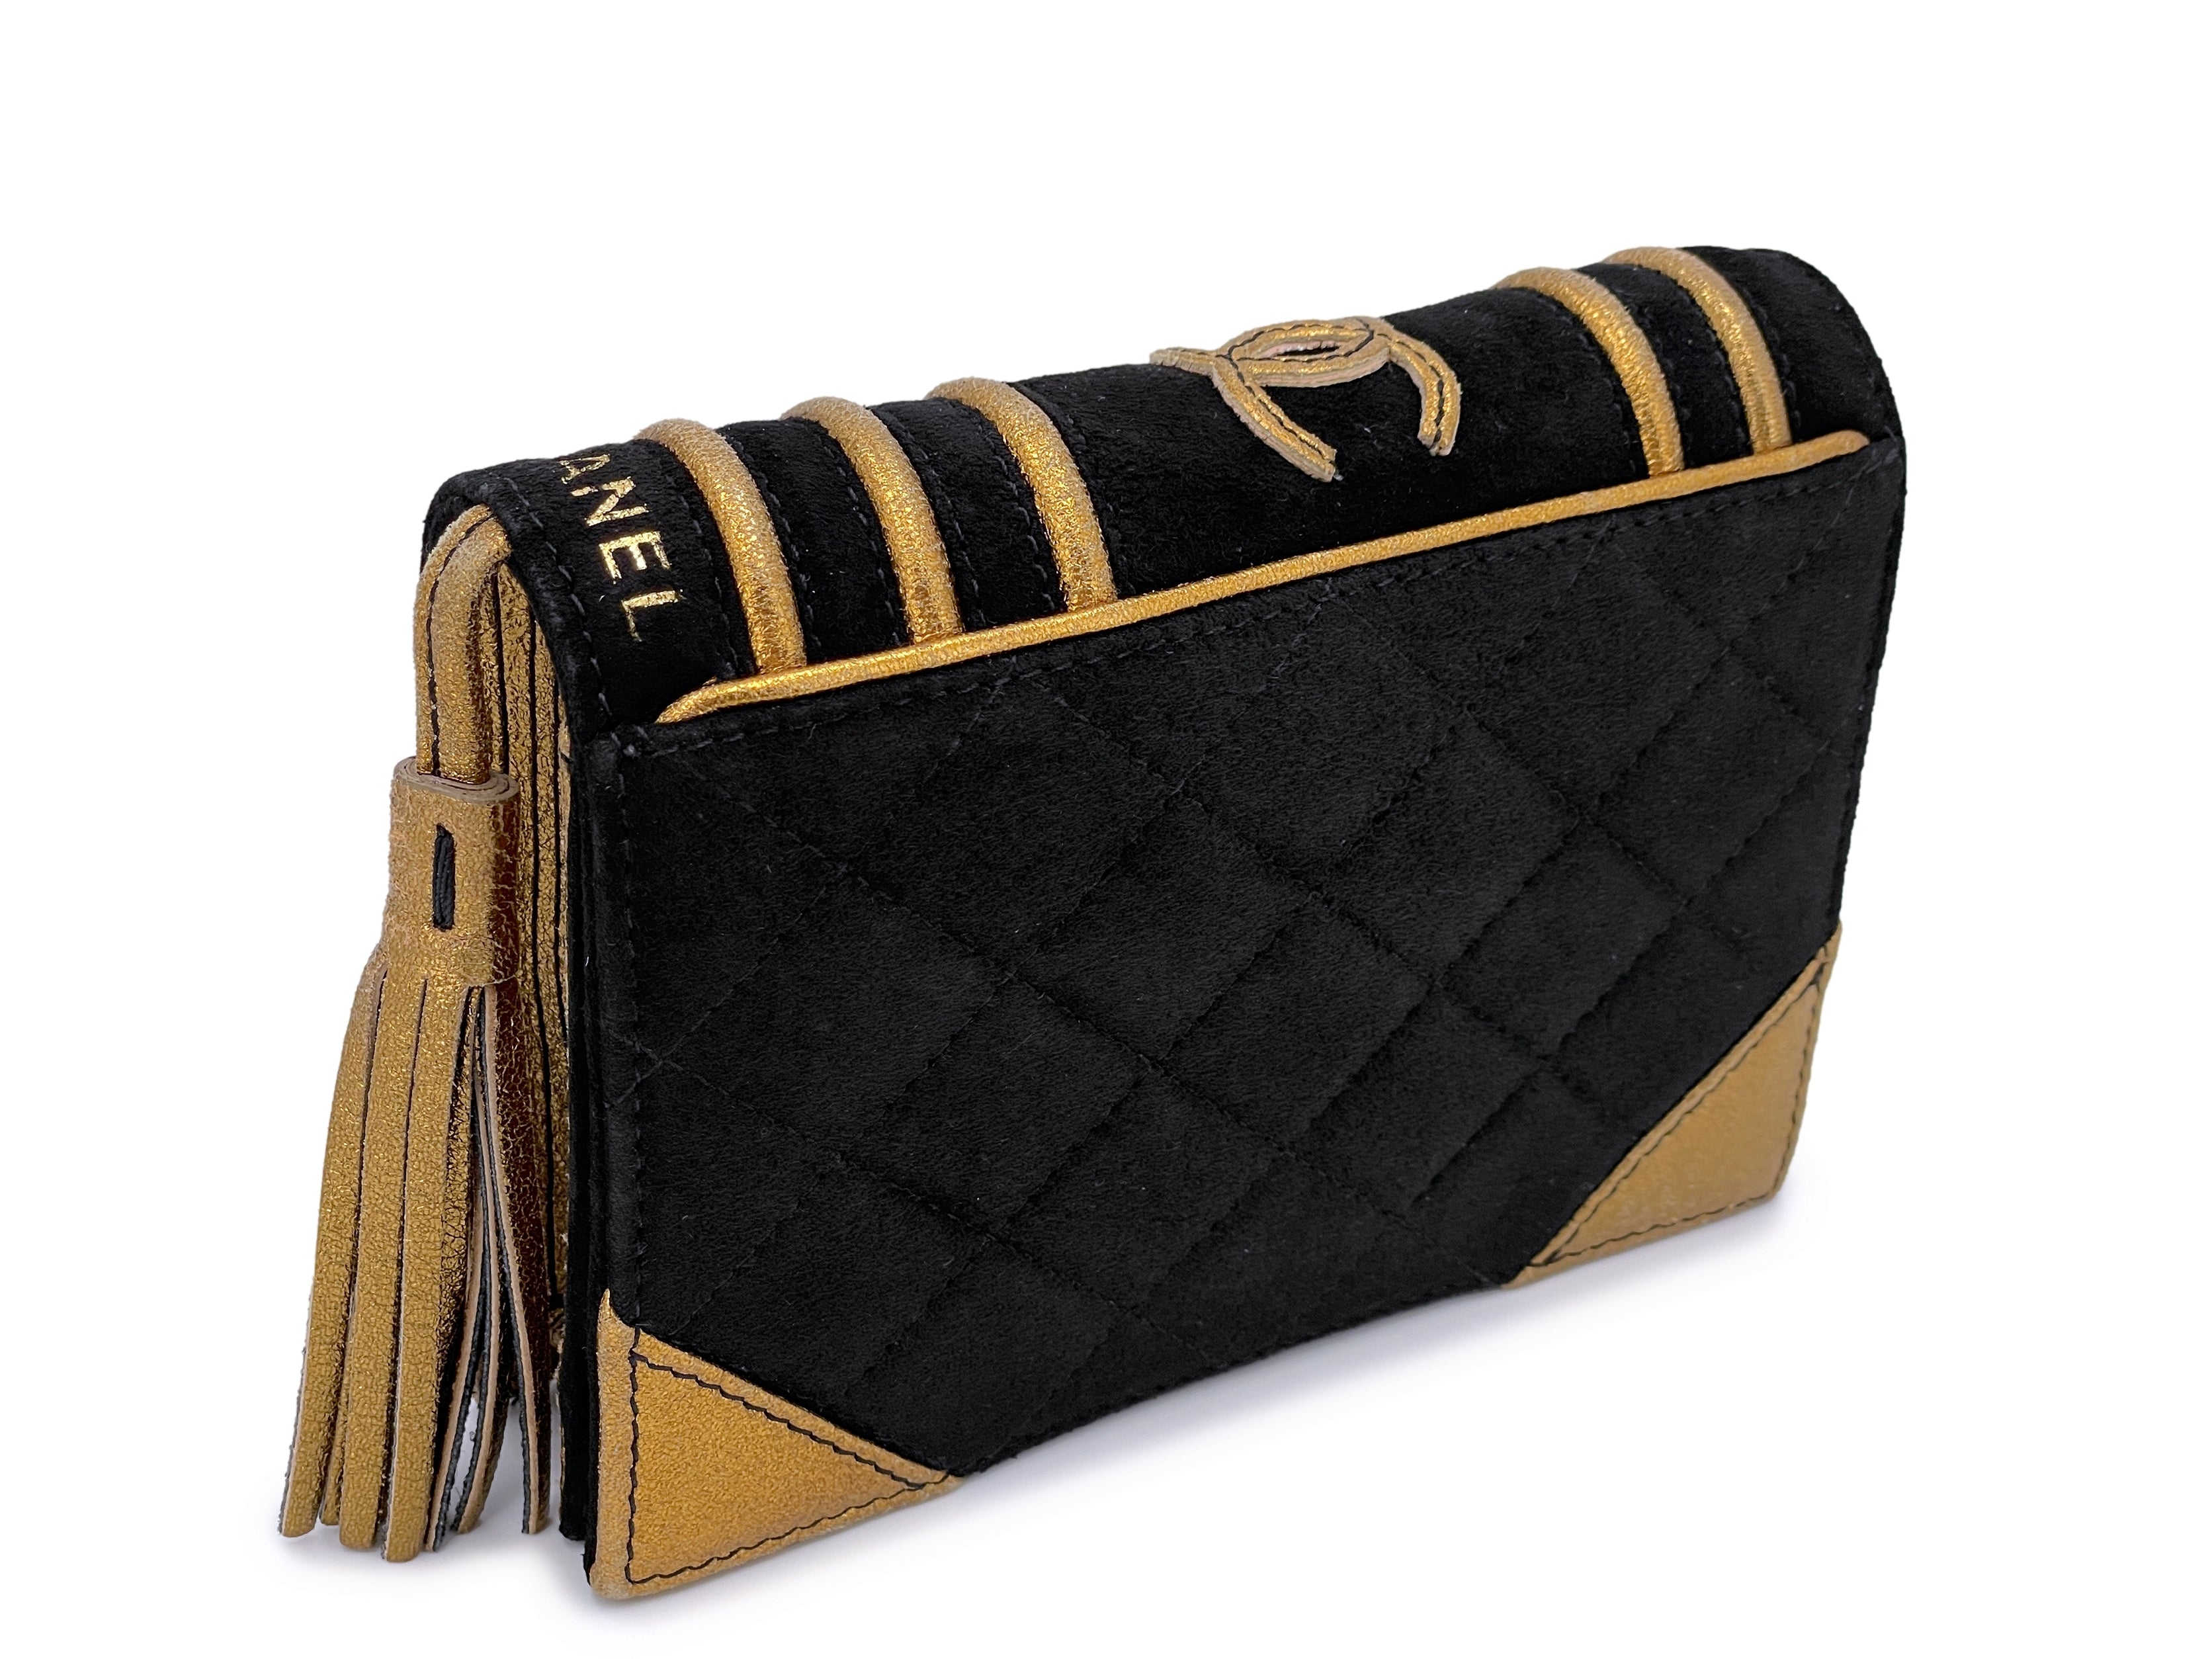 Chanel Minaudière Limited Edition Black Authenticity Card Gold